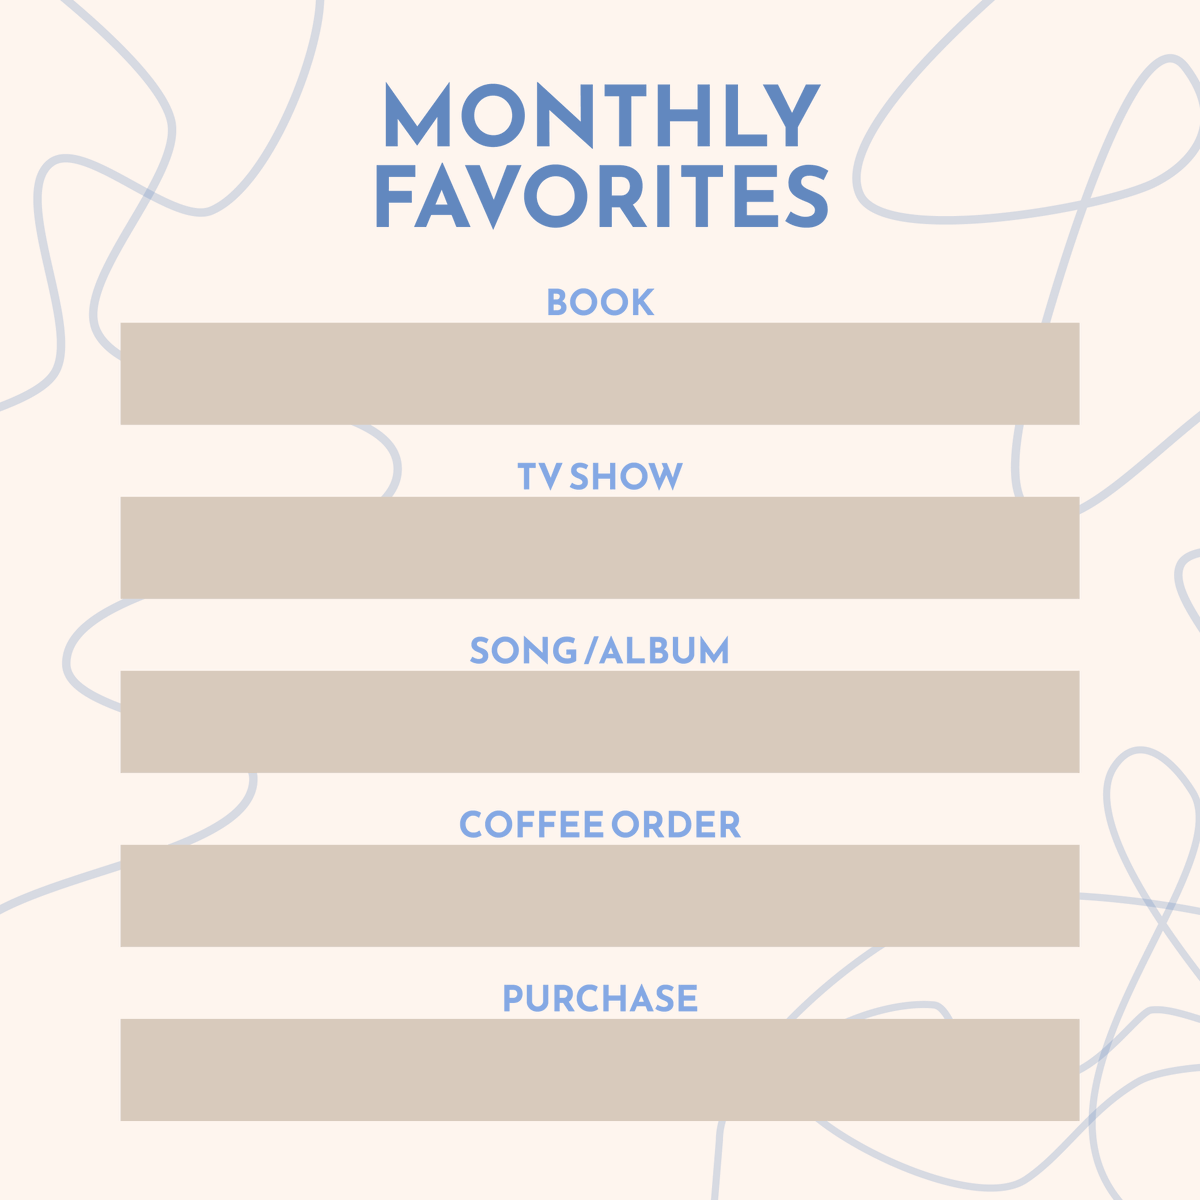 What are a few things you've been loving this month? #MonthlyFavorites
#Alportersellsorlando